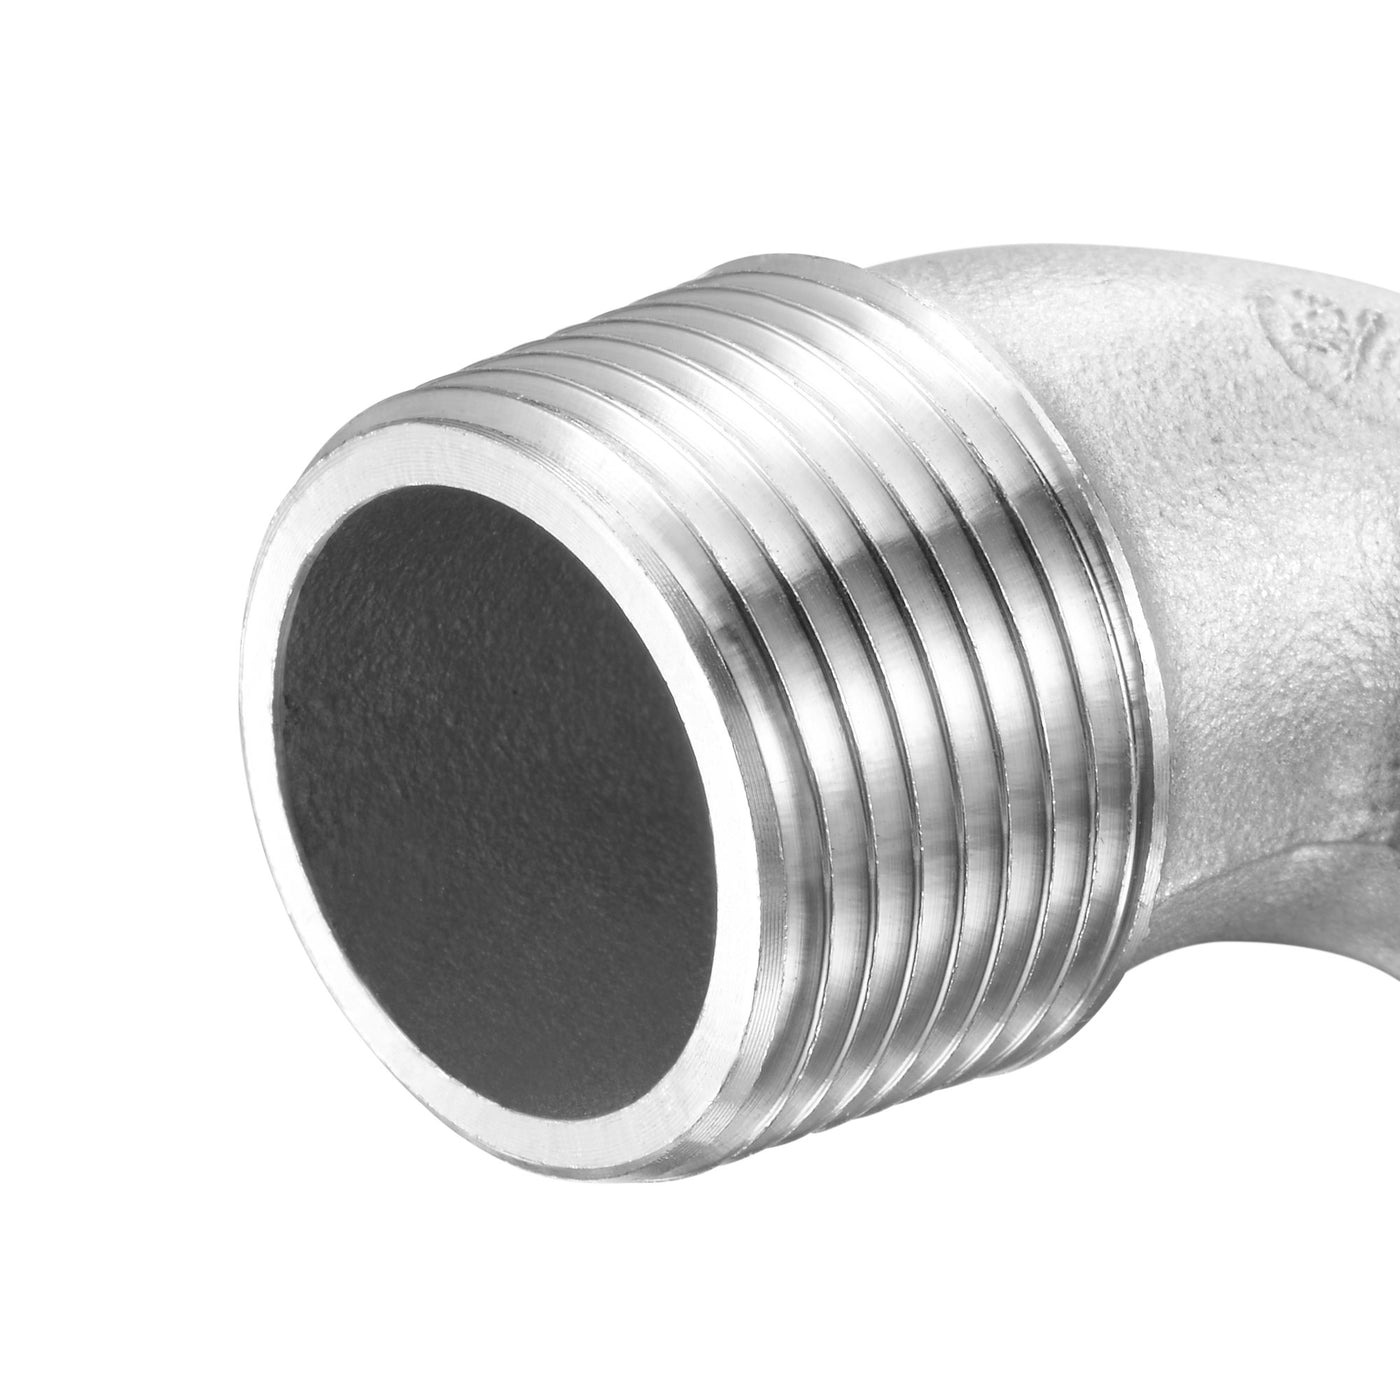 Uxcell Uxcell Stainless Steel Hose Barb Fitting Elbow 20mm x G3/4 Male Pipe Connector 2pcs